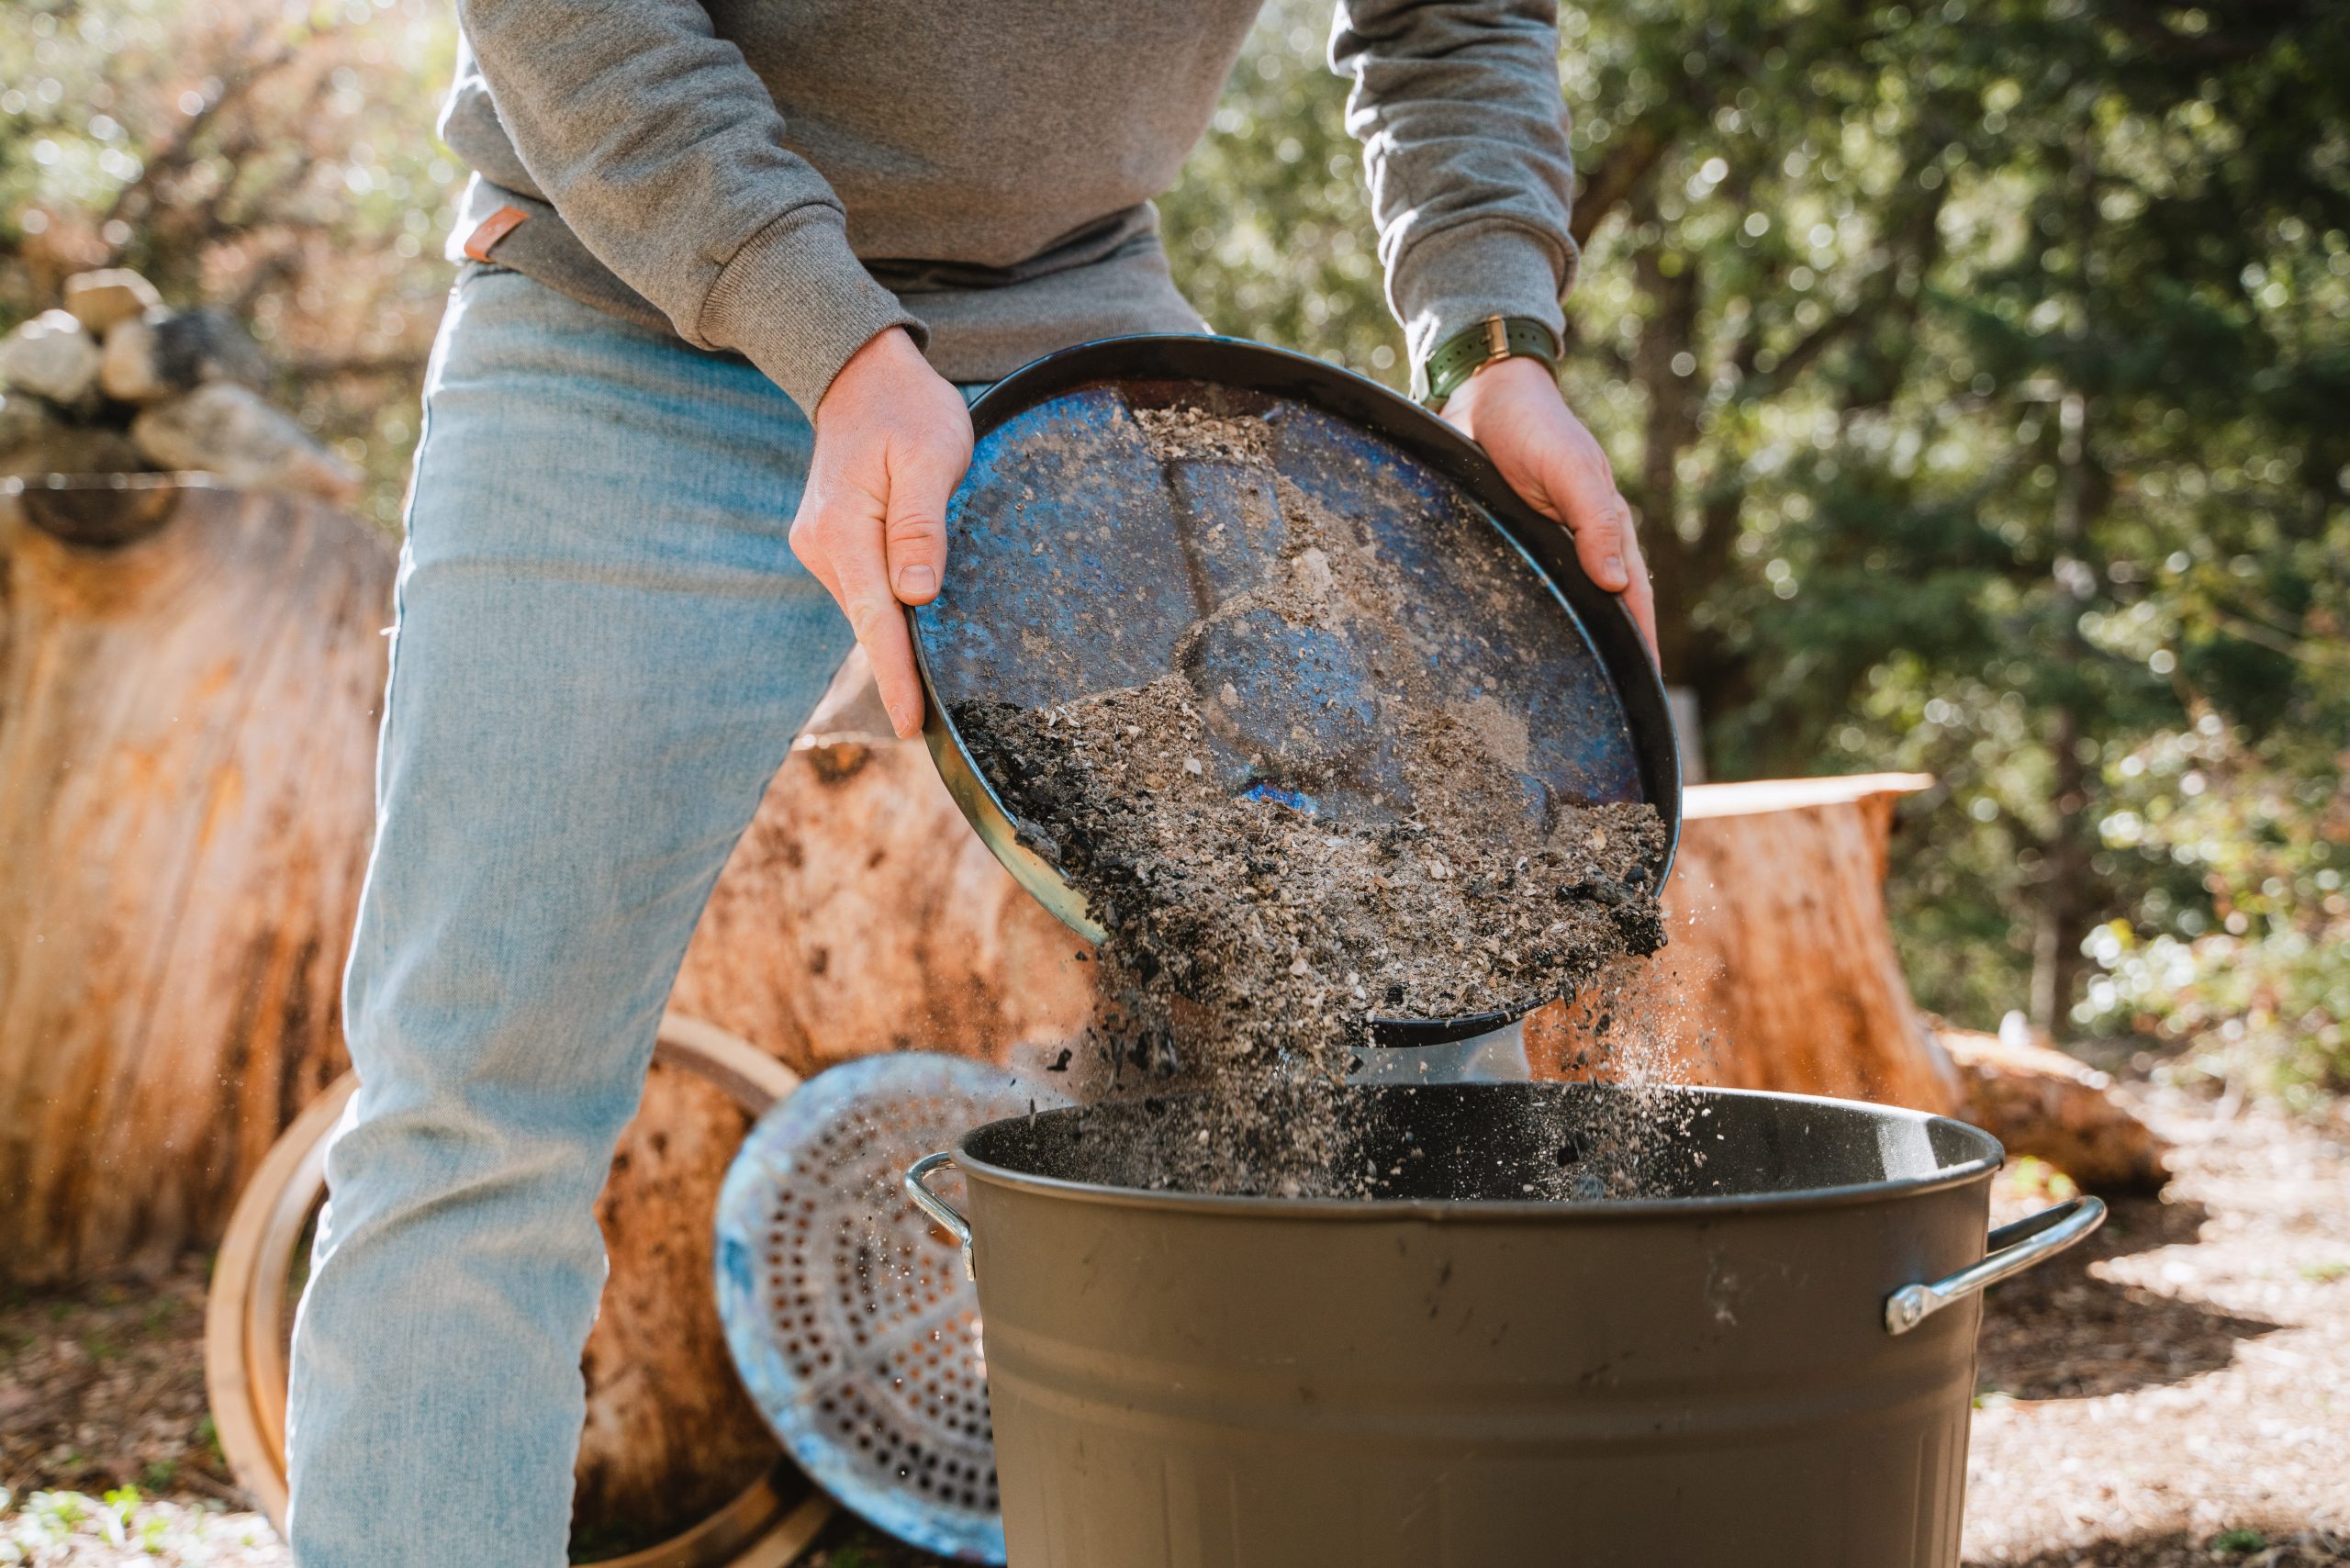 Solo Stove Announces the Fire Pit 2.0 - Easier Cleanup